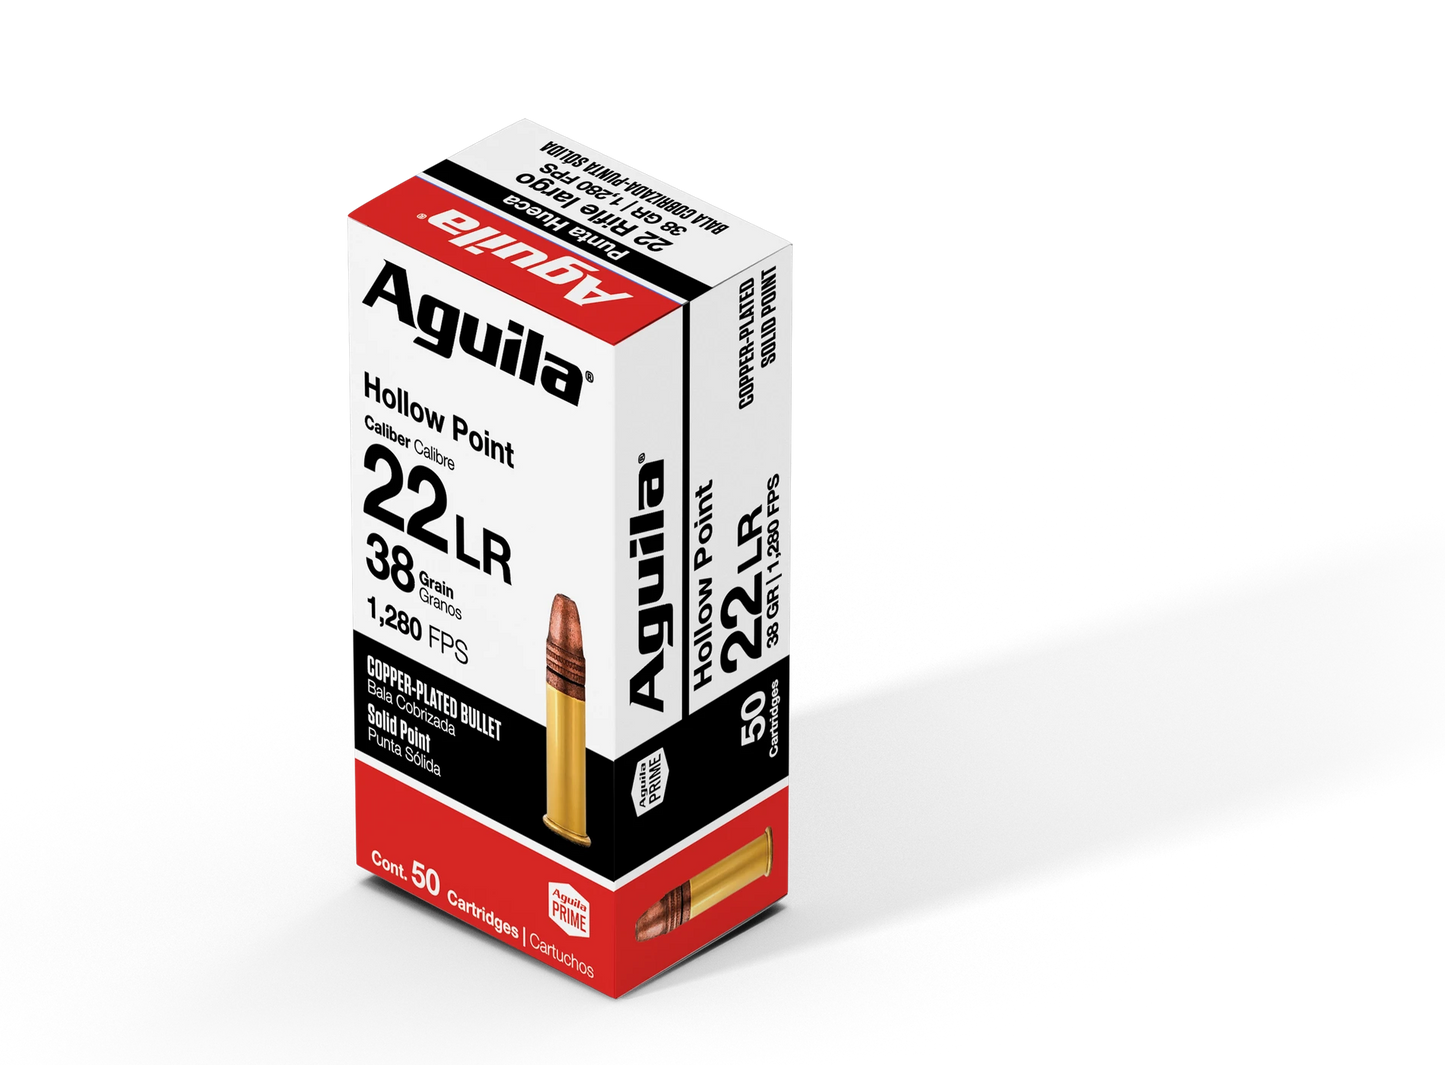 Aguila Super Extra 38gr HP 1280fps